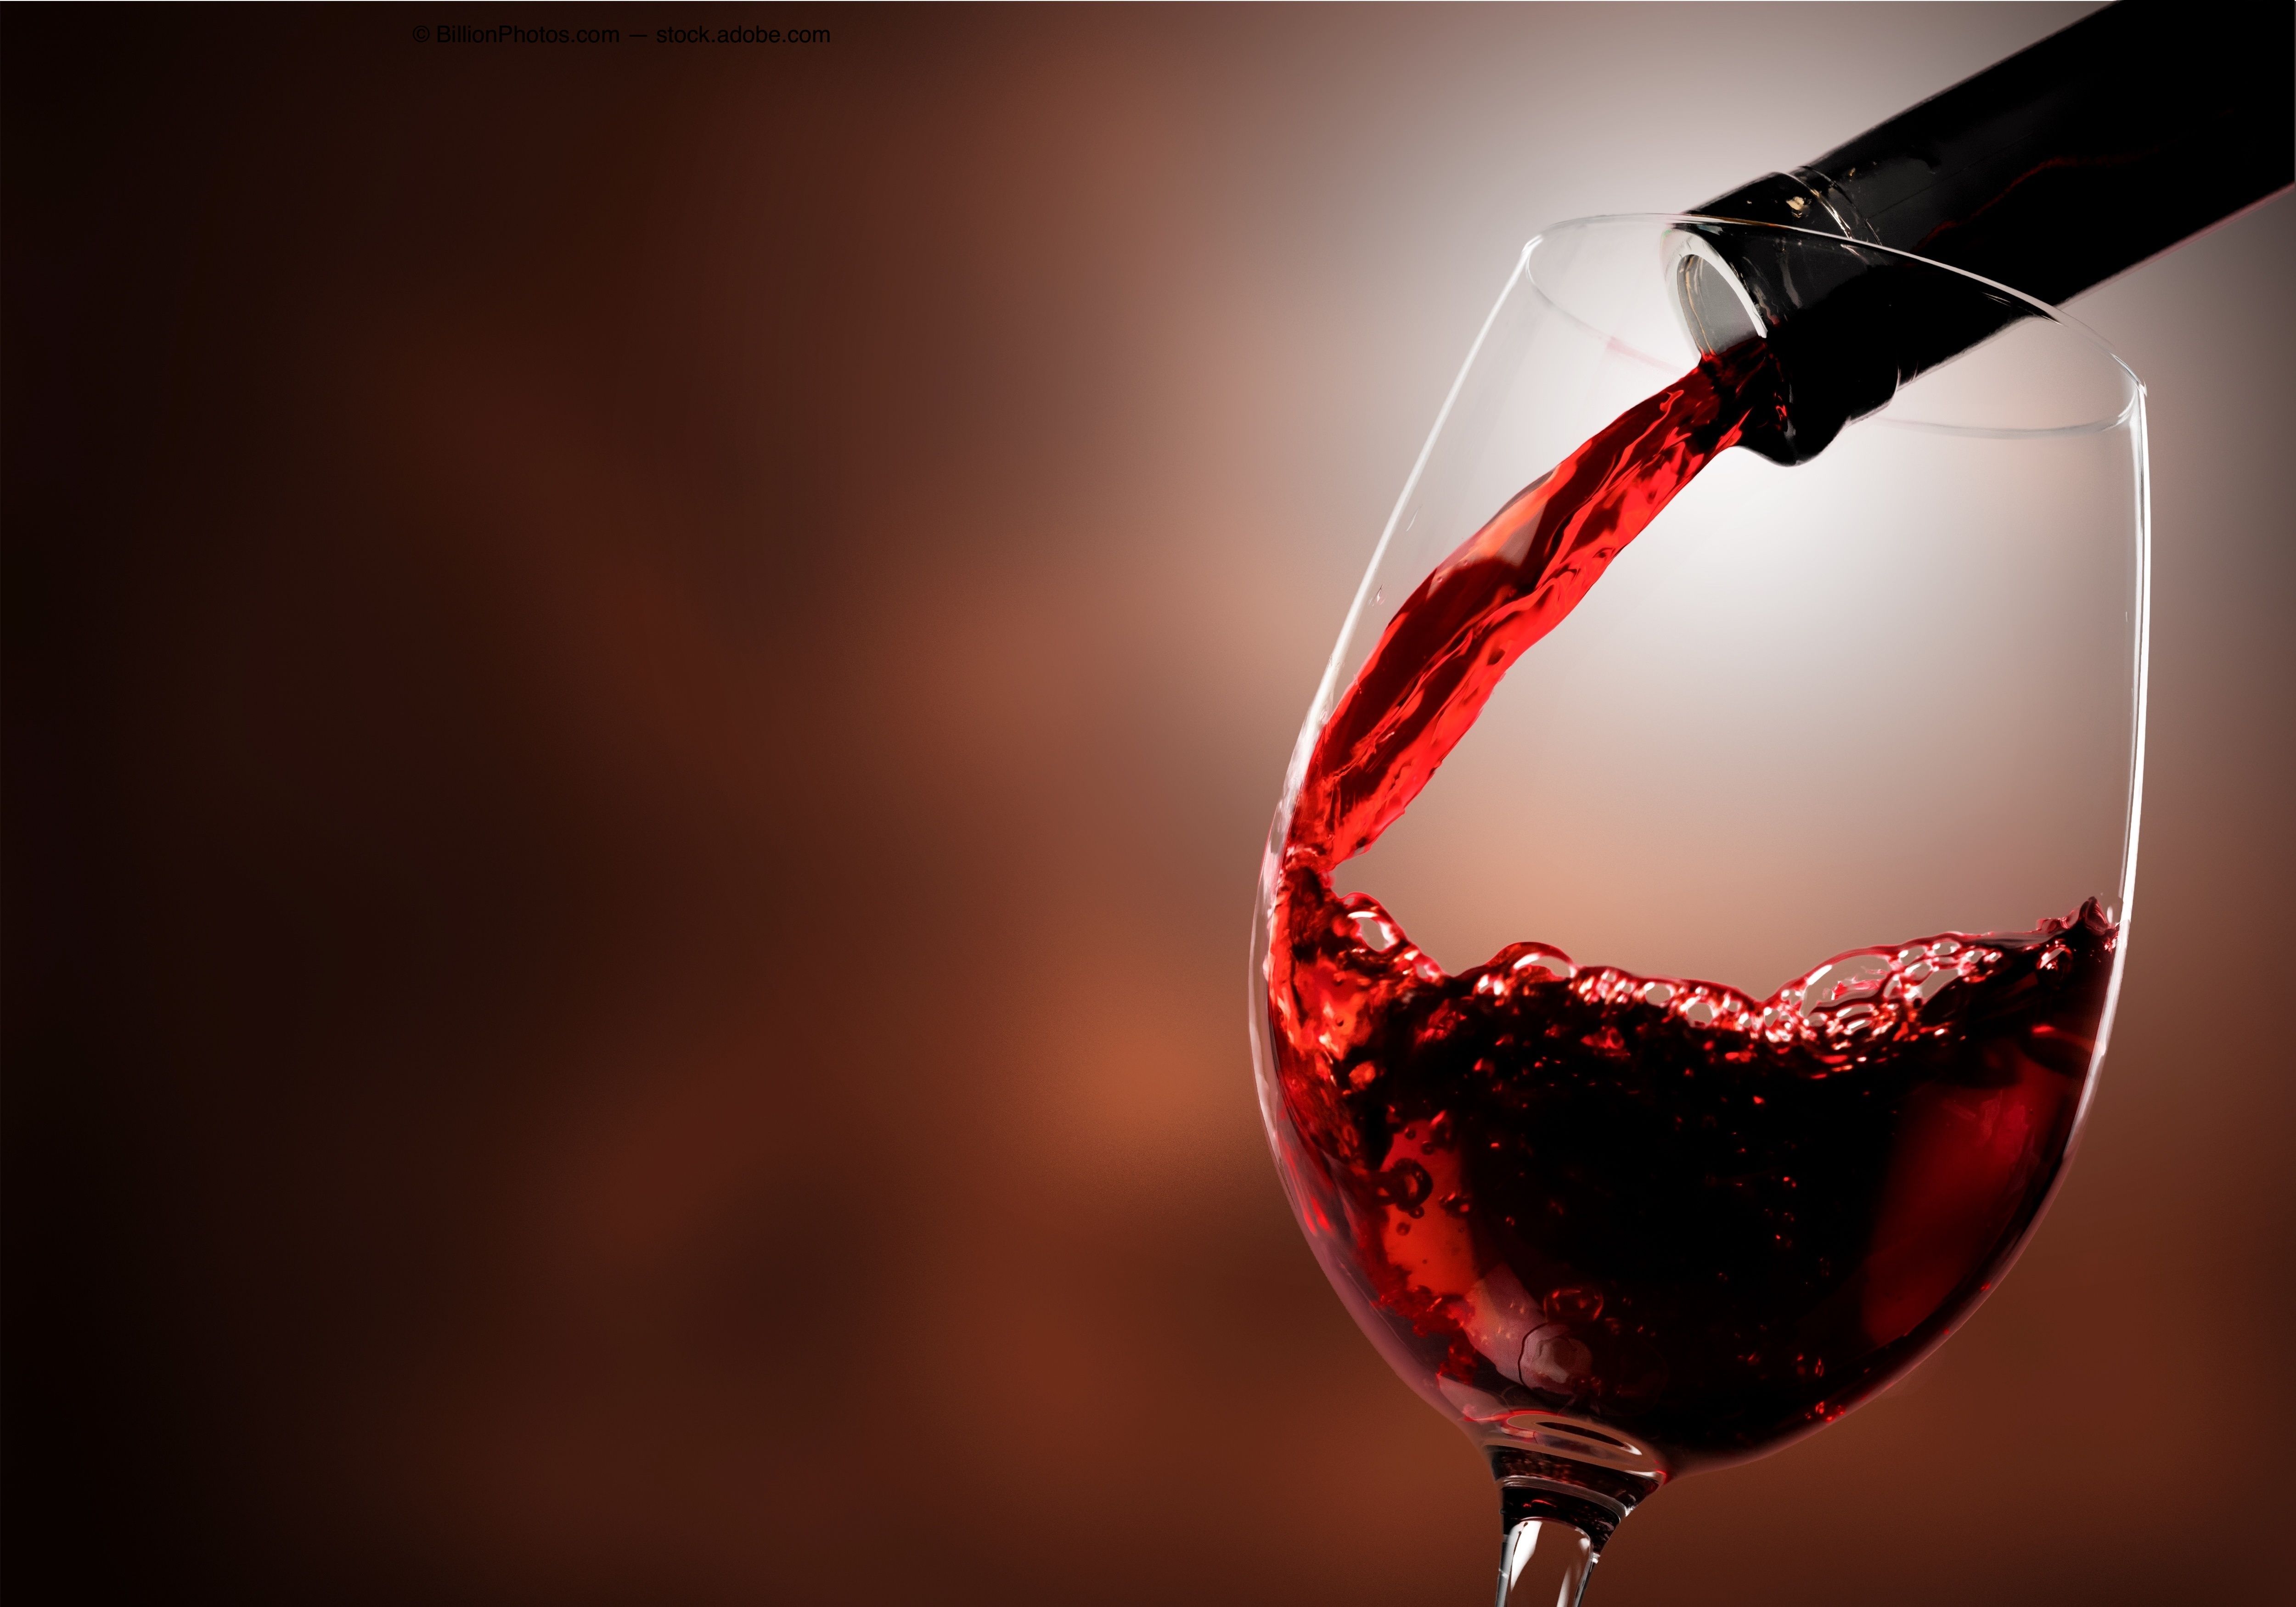 Drinking red wine may prevent cataracts